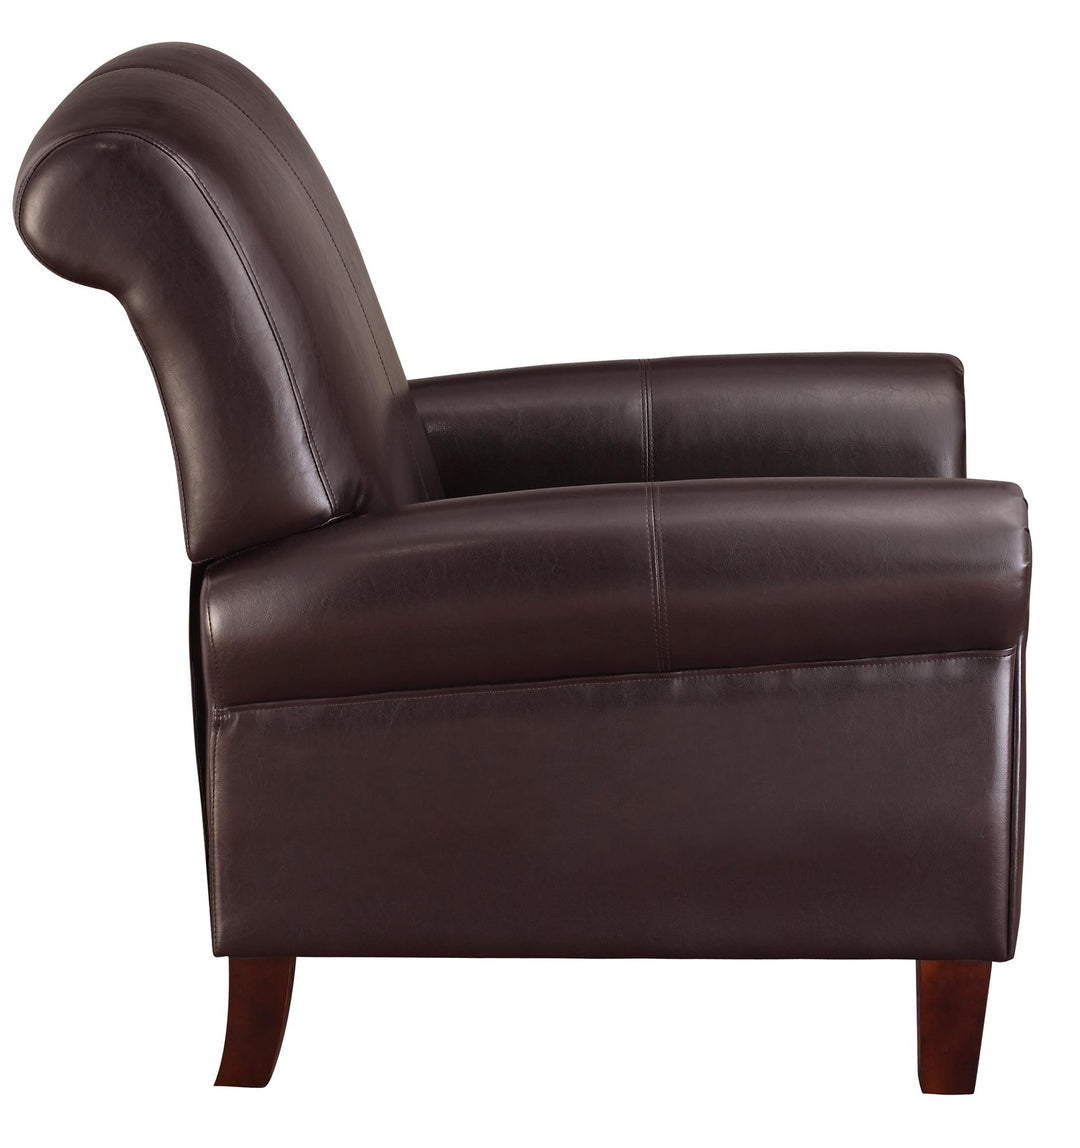 Club chair with faux leather upholstery -  Brown